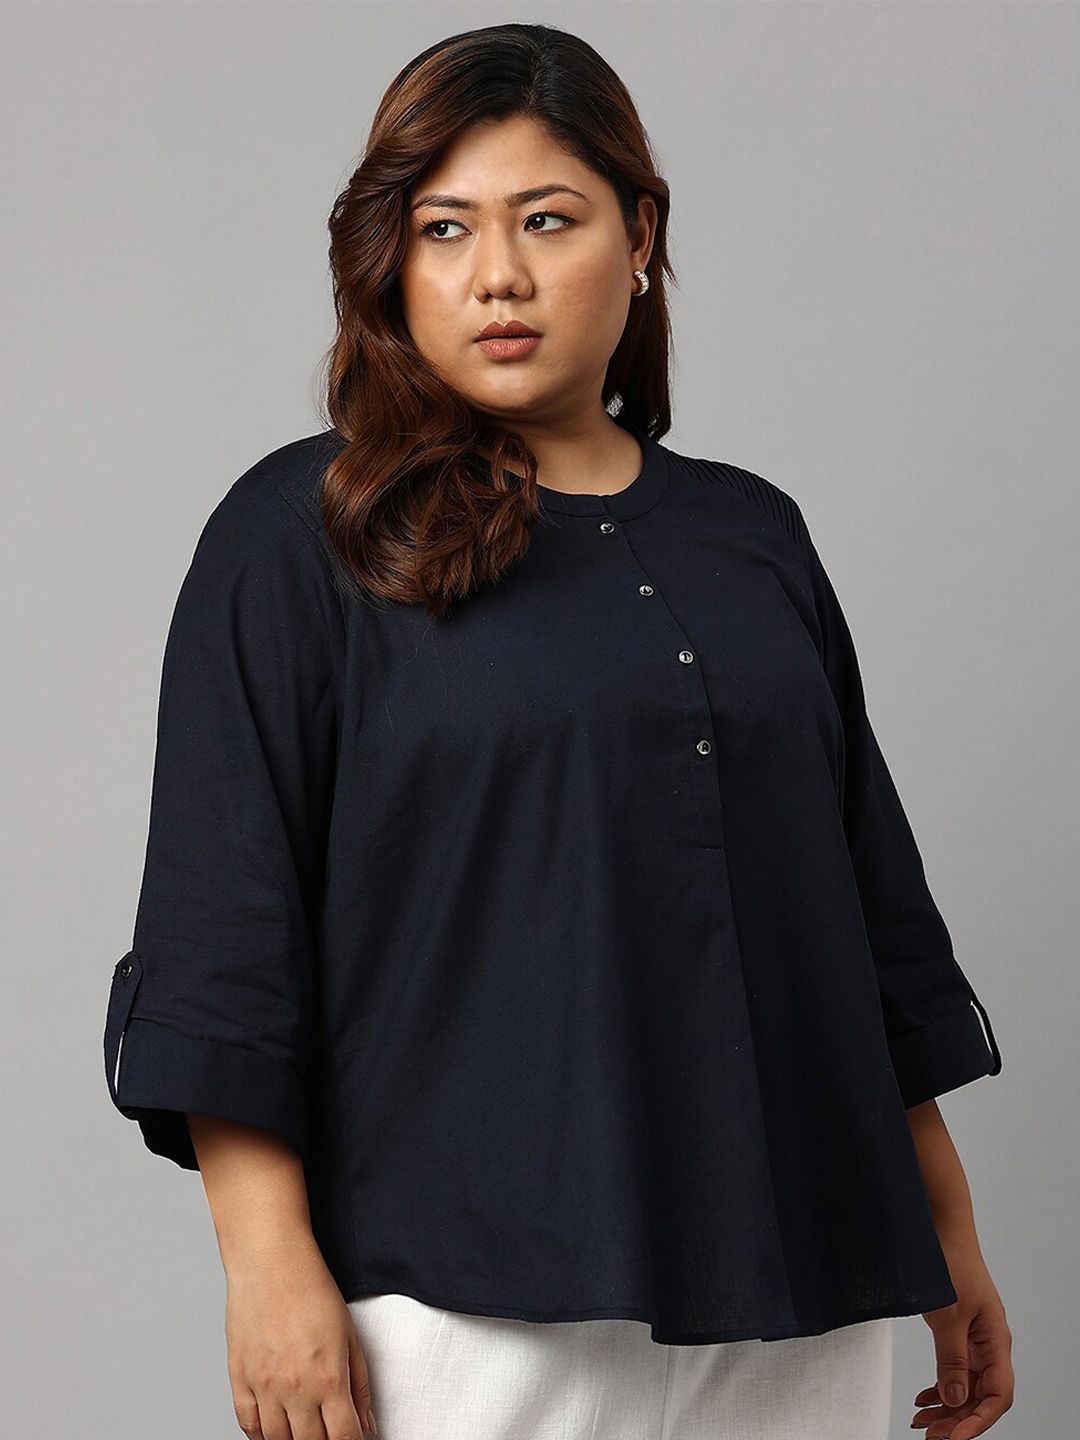 W Woman Plus Size Solid  Top Price in India